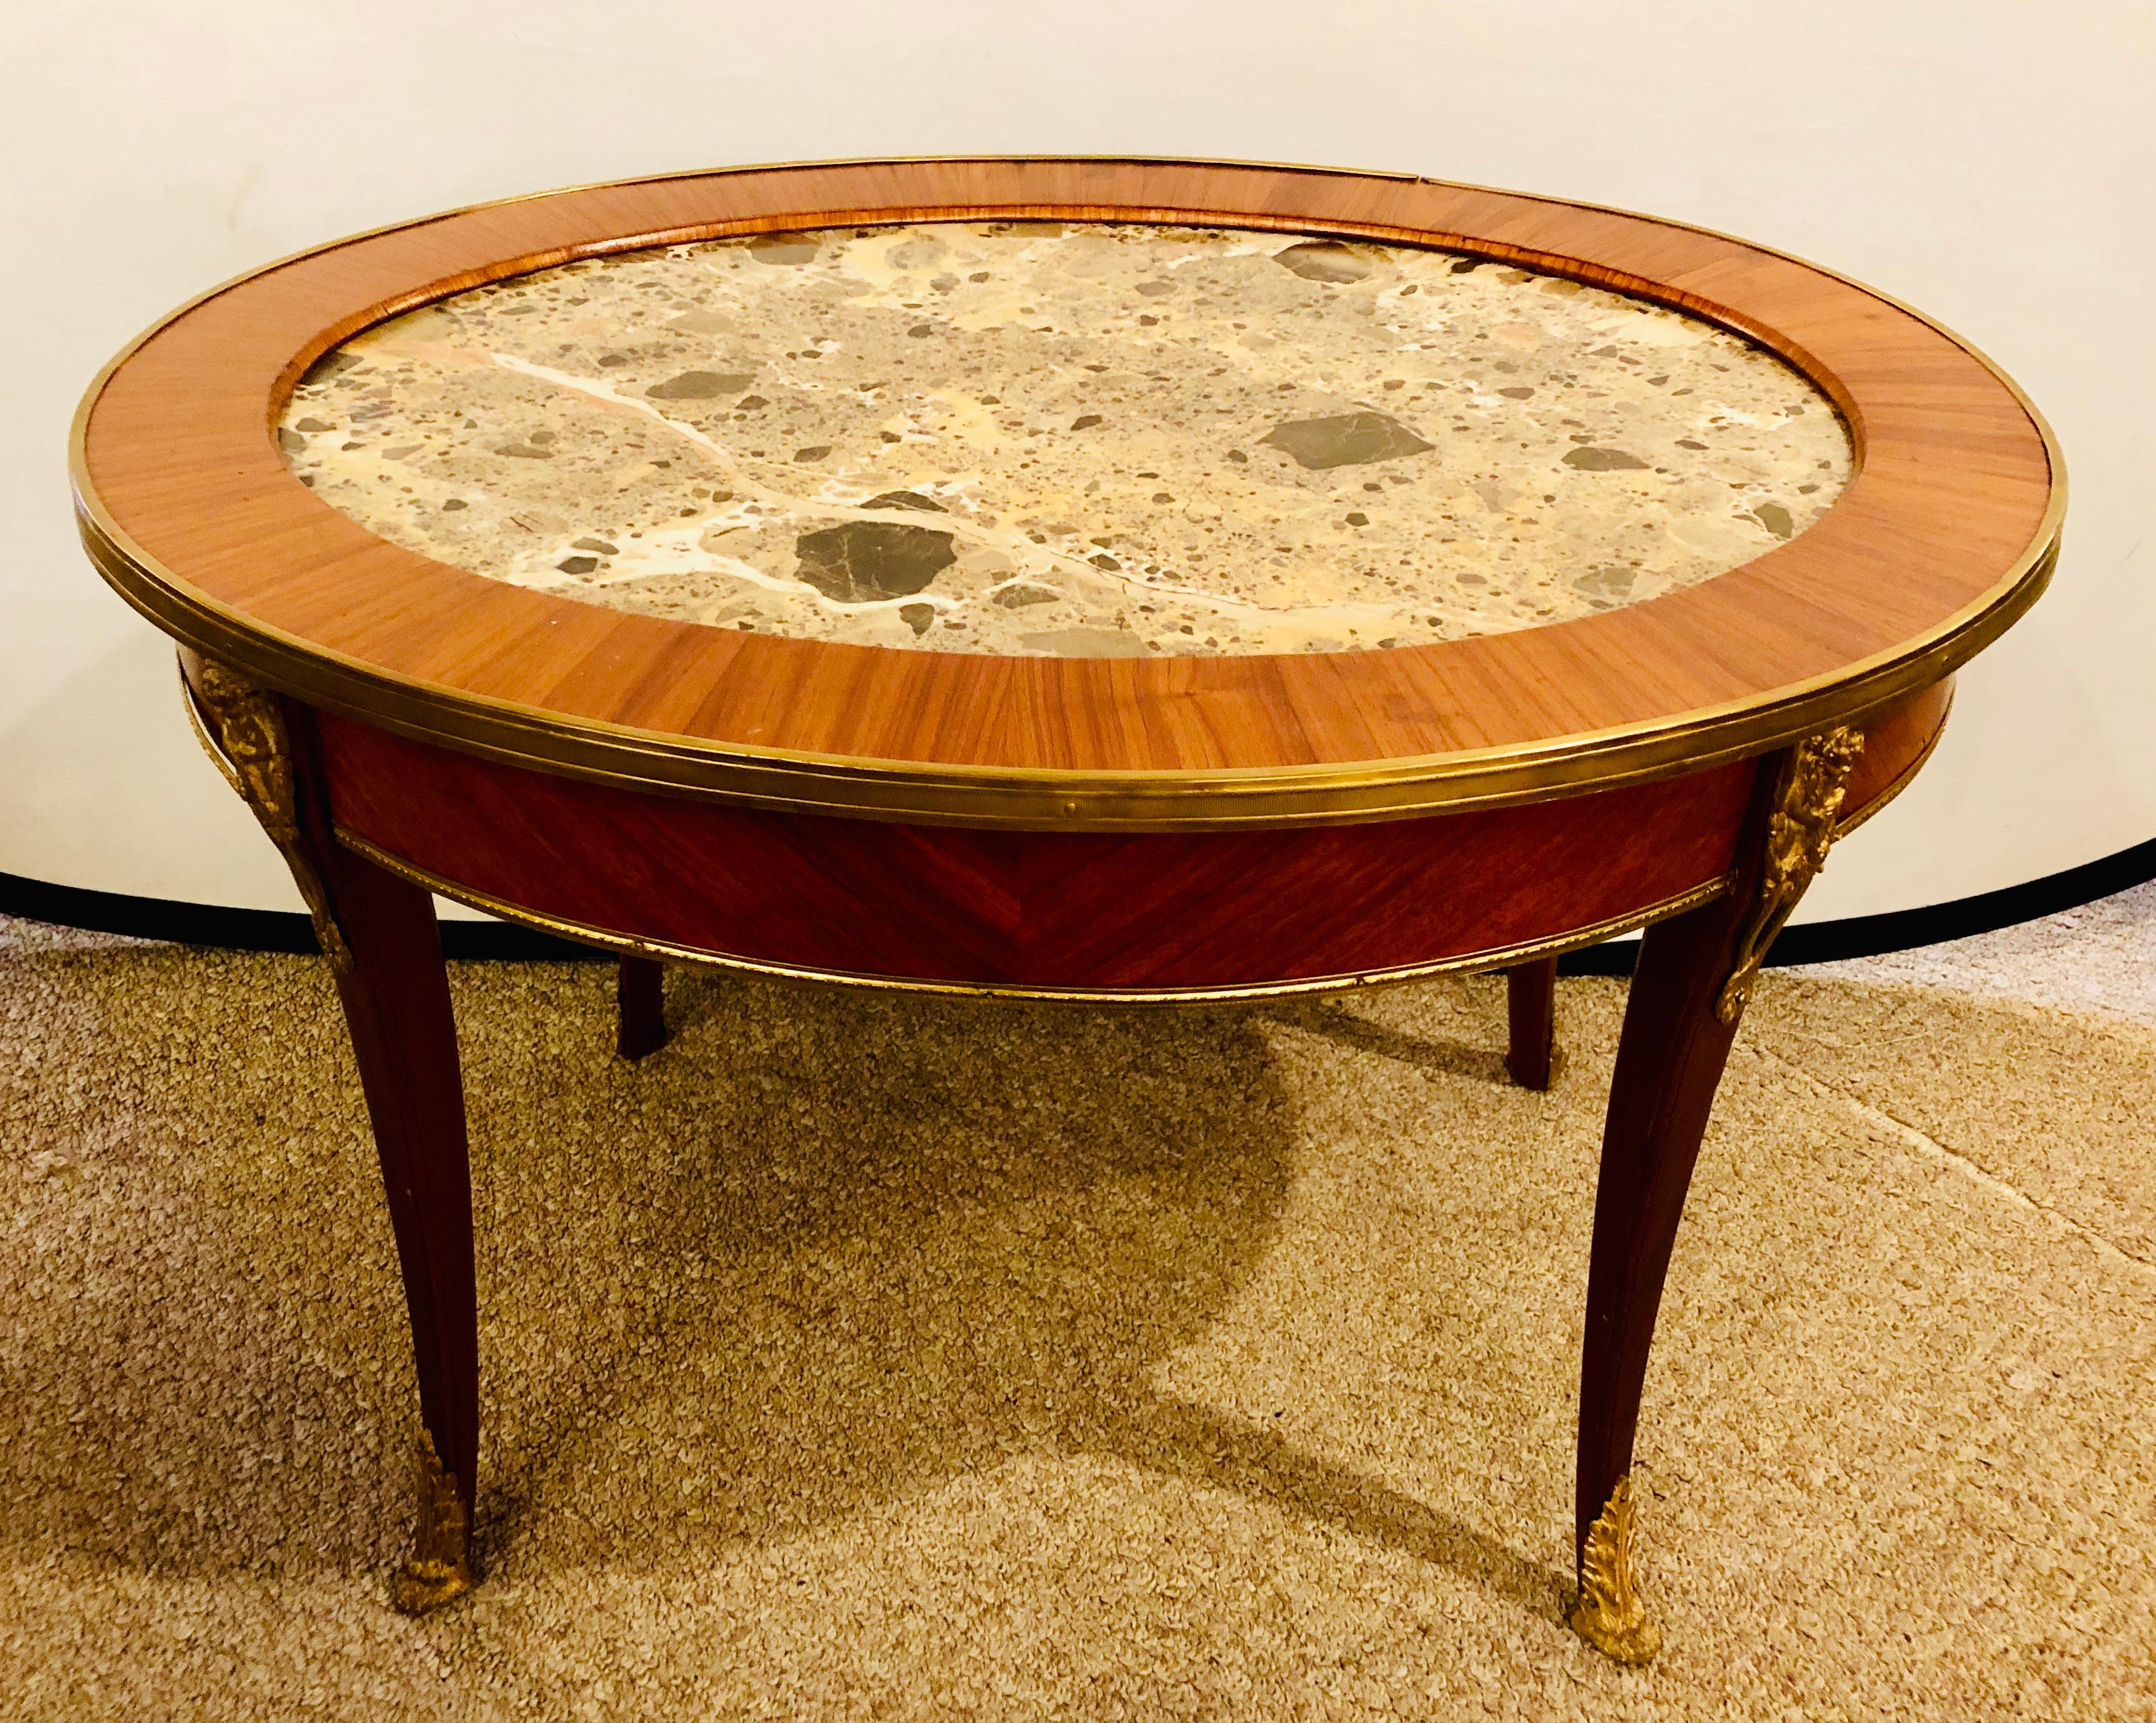 20th Century 1920s Louis XVI Style Coffee or Low Table Walnut and Marble